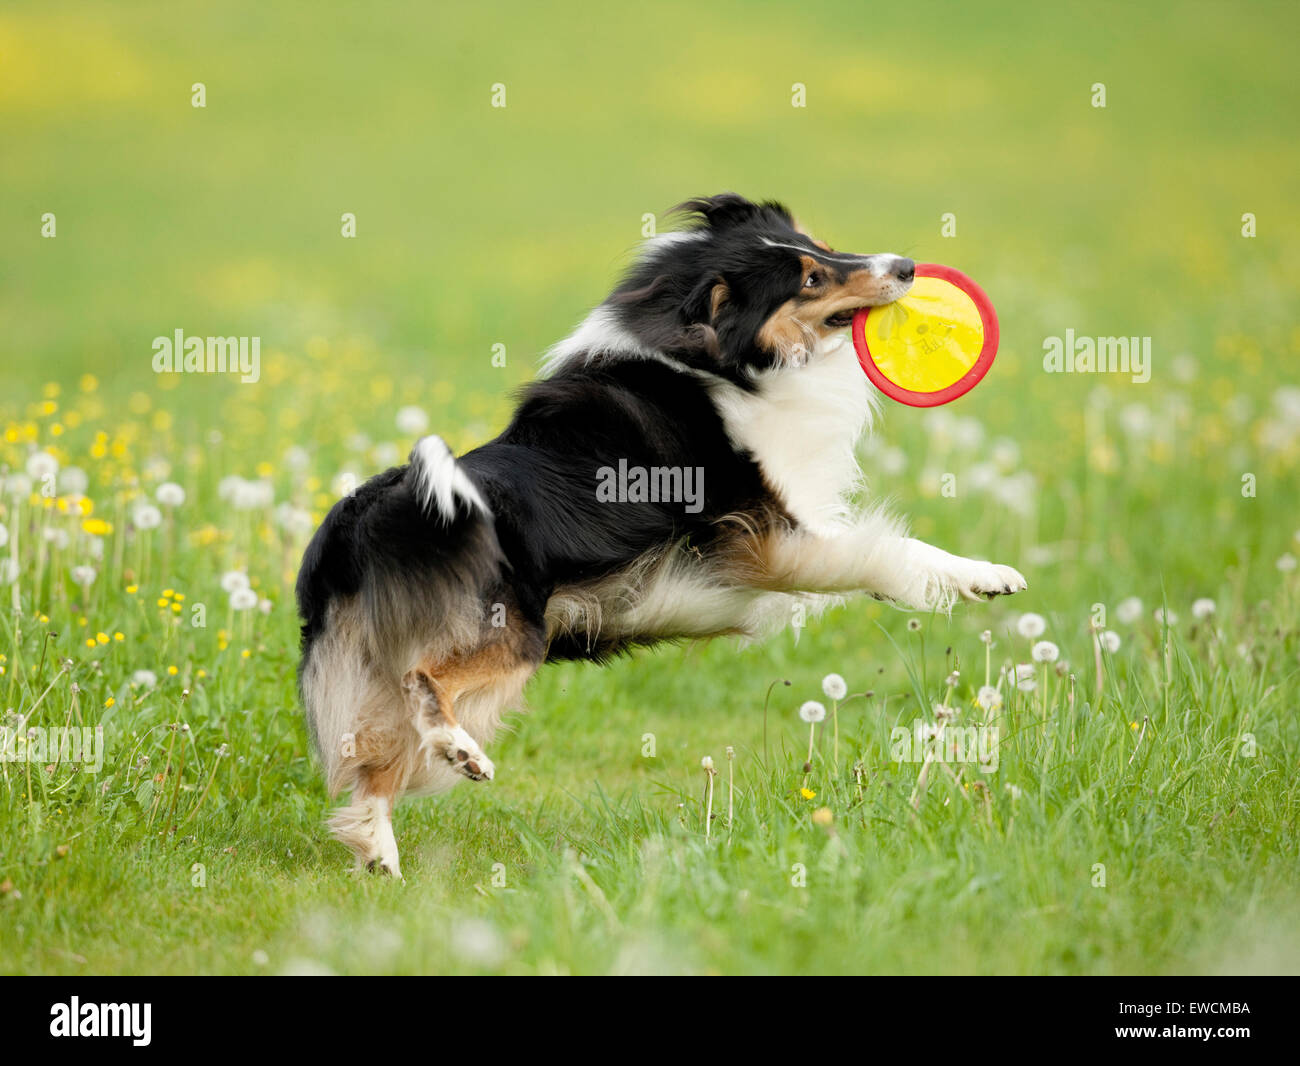 Rough Collie. Adult dog catching a flying disc. Germany Stock Photo